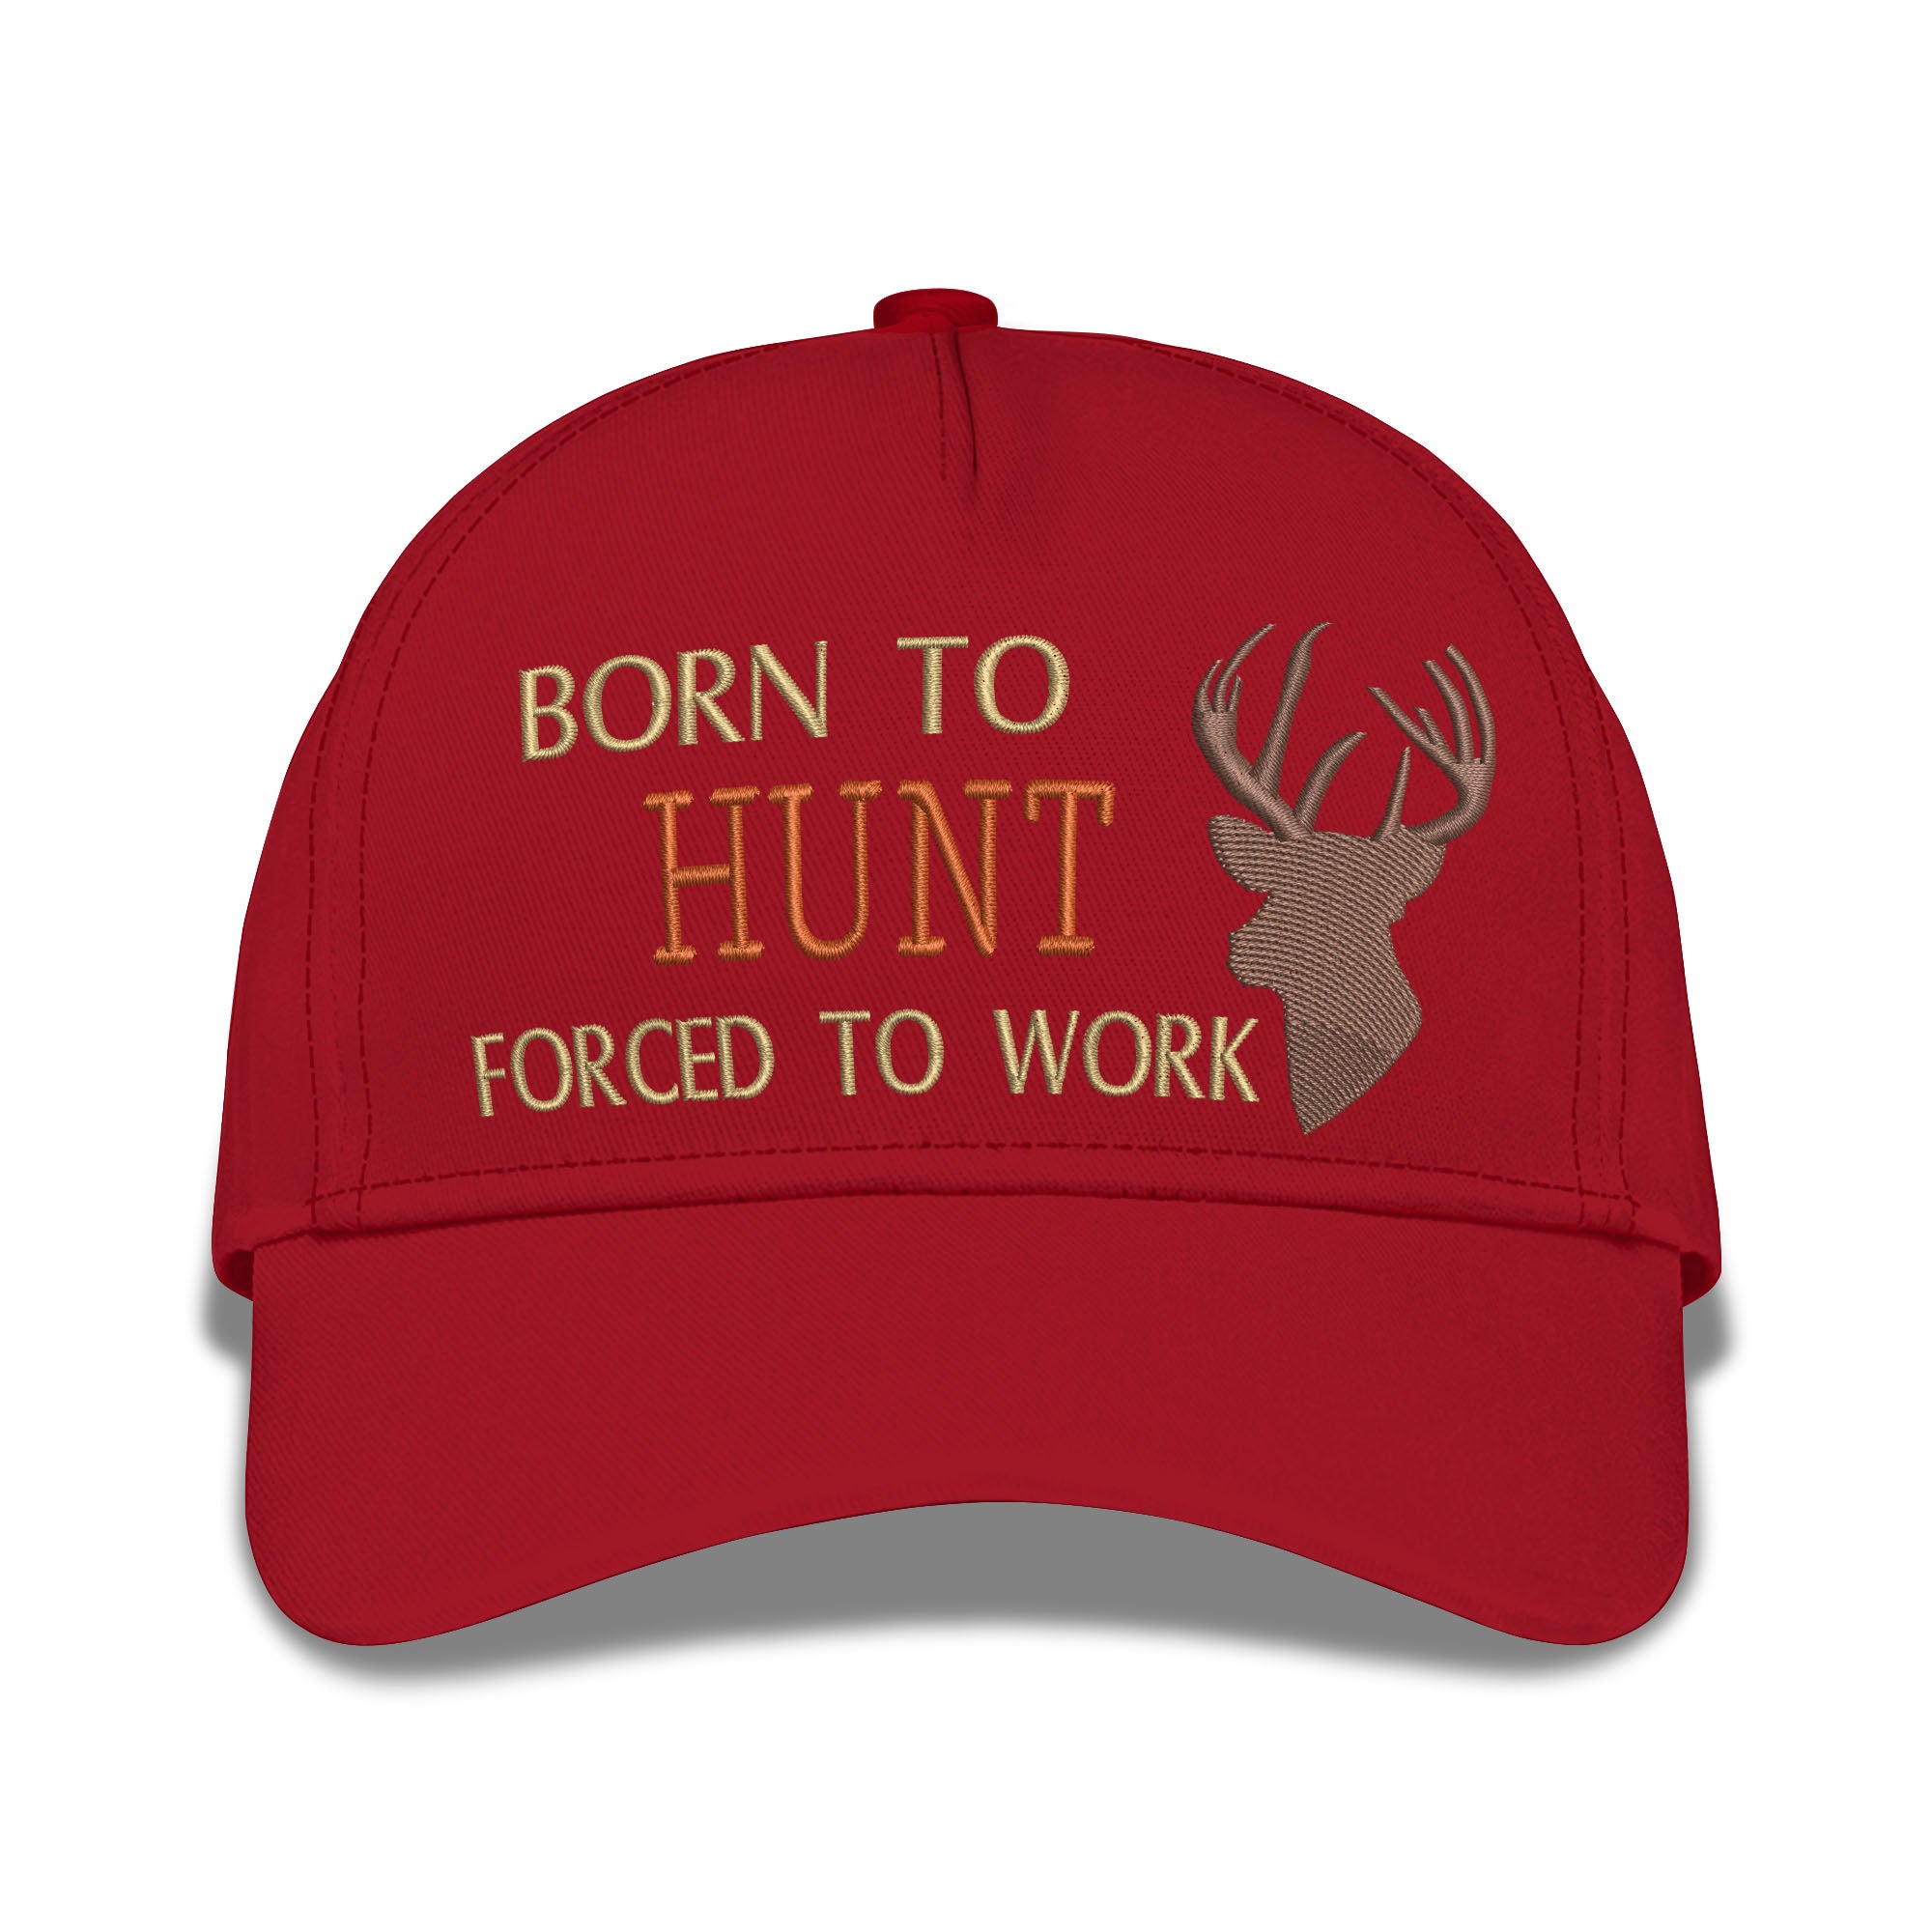 Born To Hunt Forced To Work Embroidered Baseball Caps